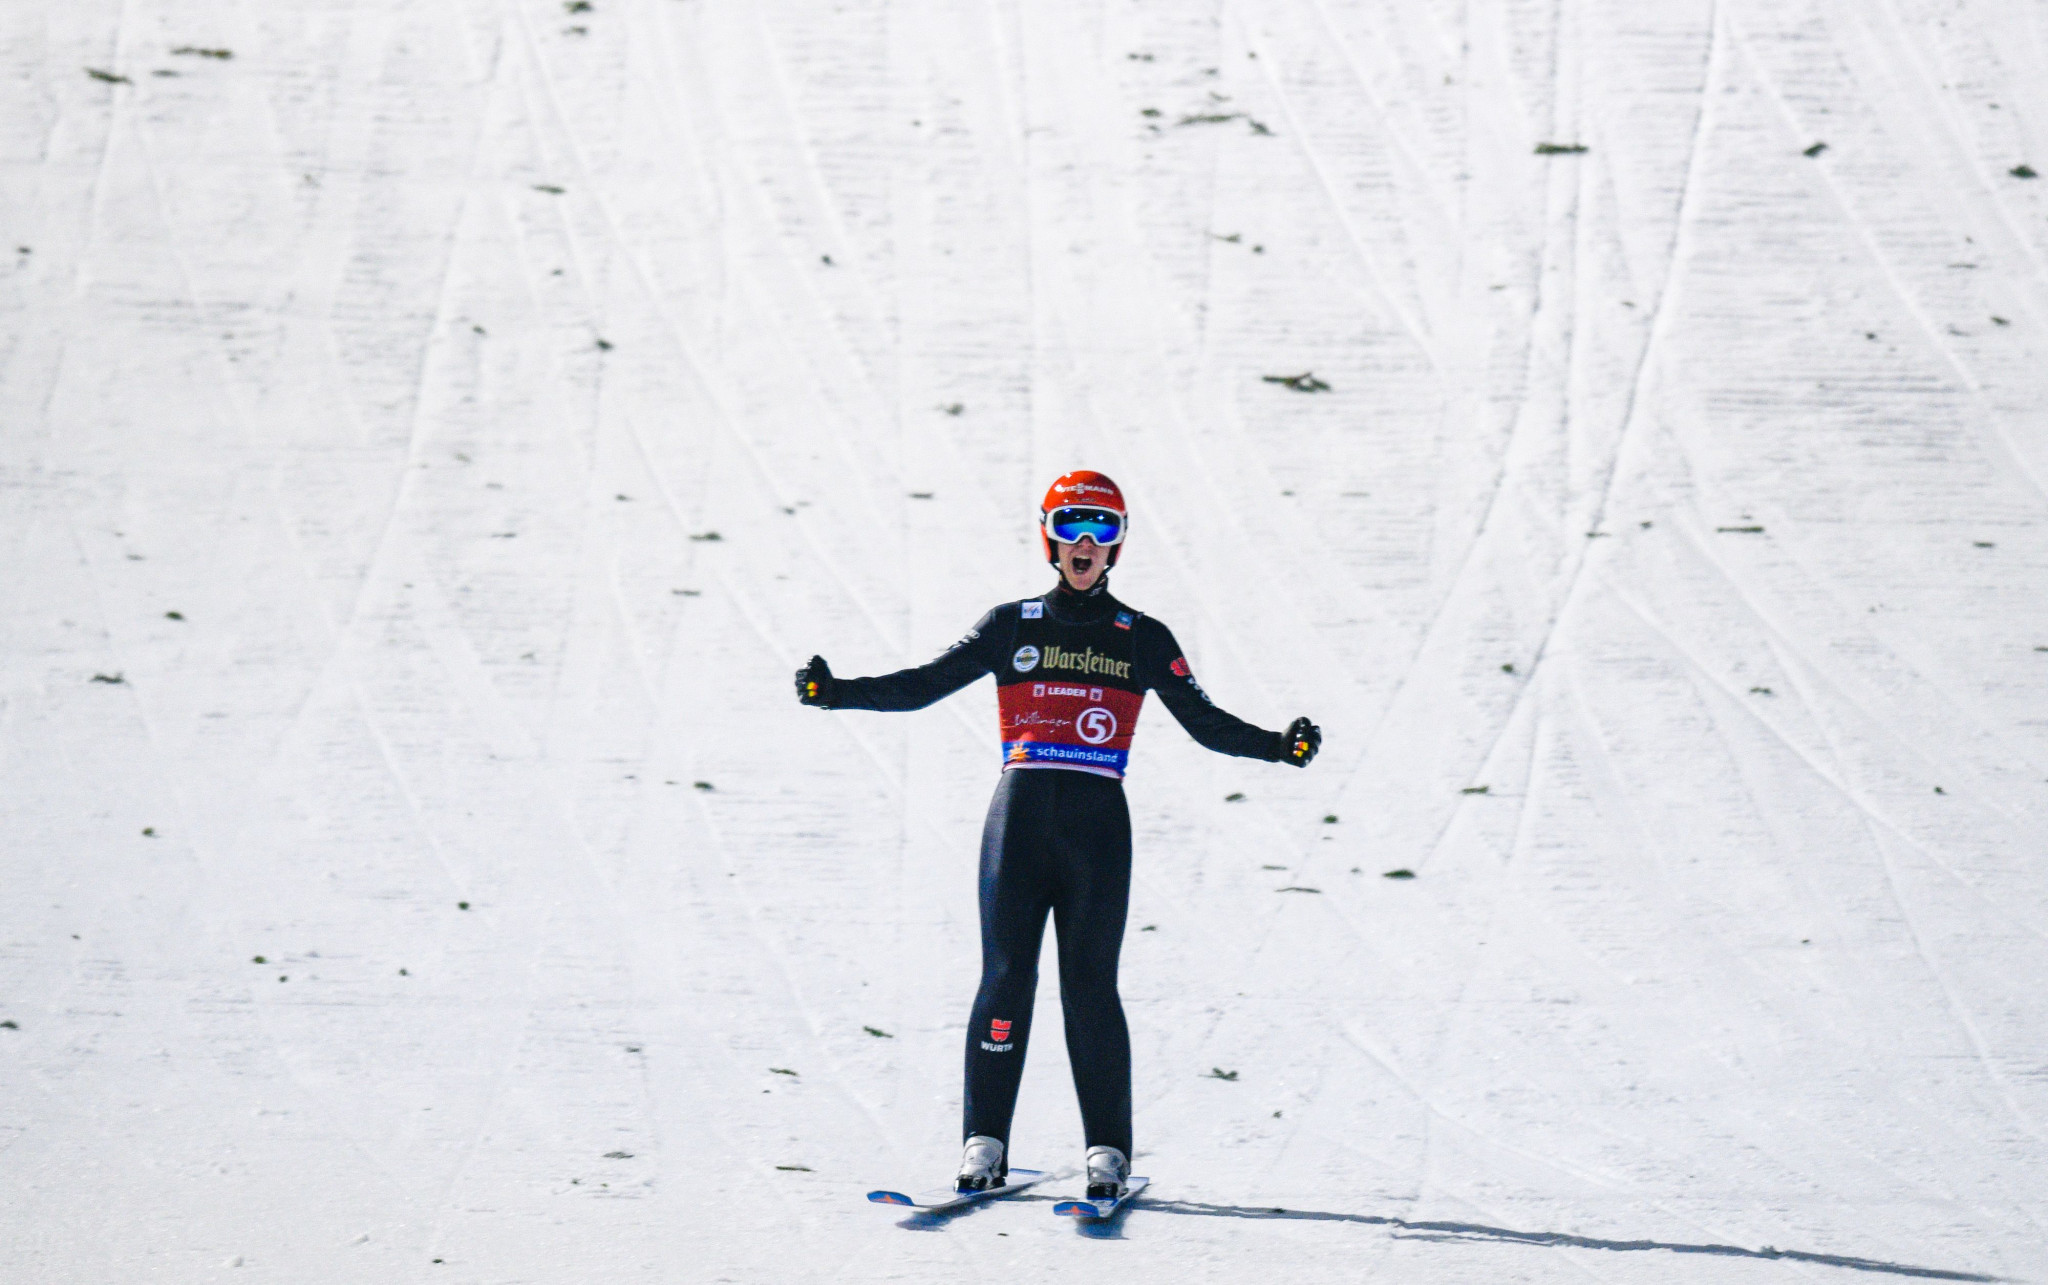 Stephan Leyhe of Germany recorded his first FIS Ski Jumping World Cup victory ©Getty Images